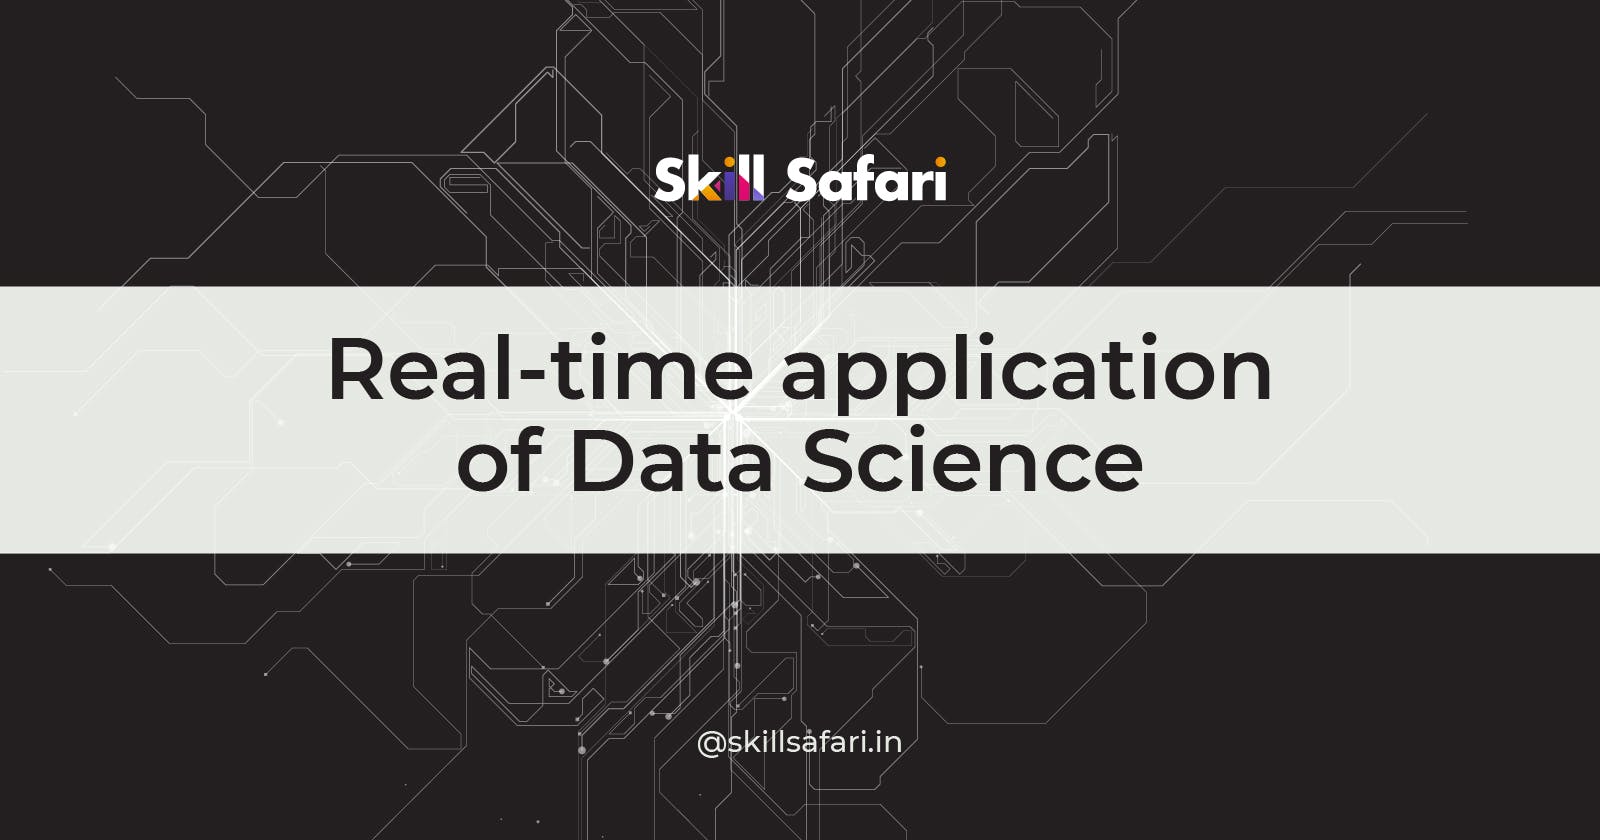 Real-time application of Data Science